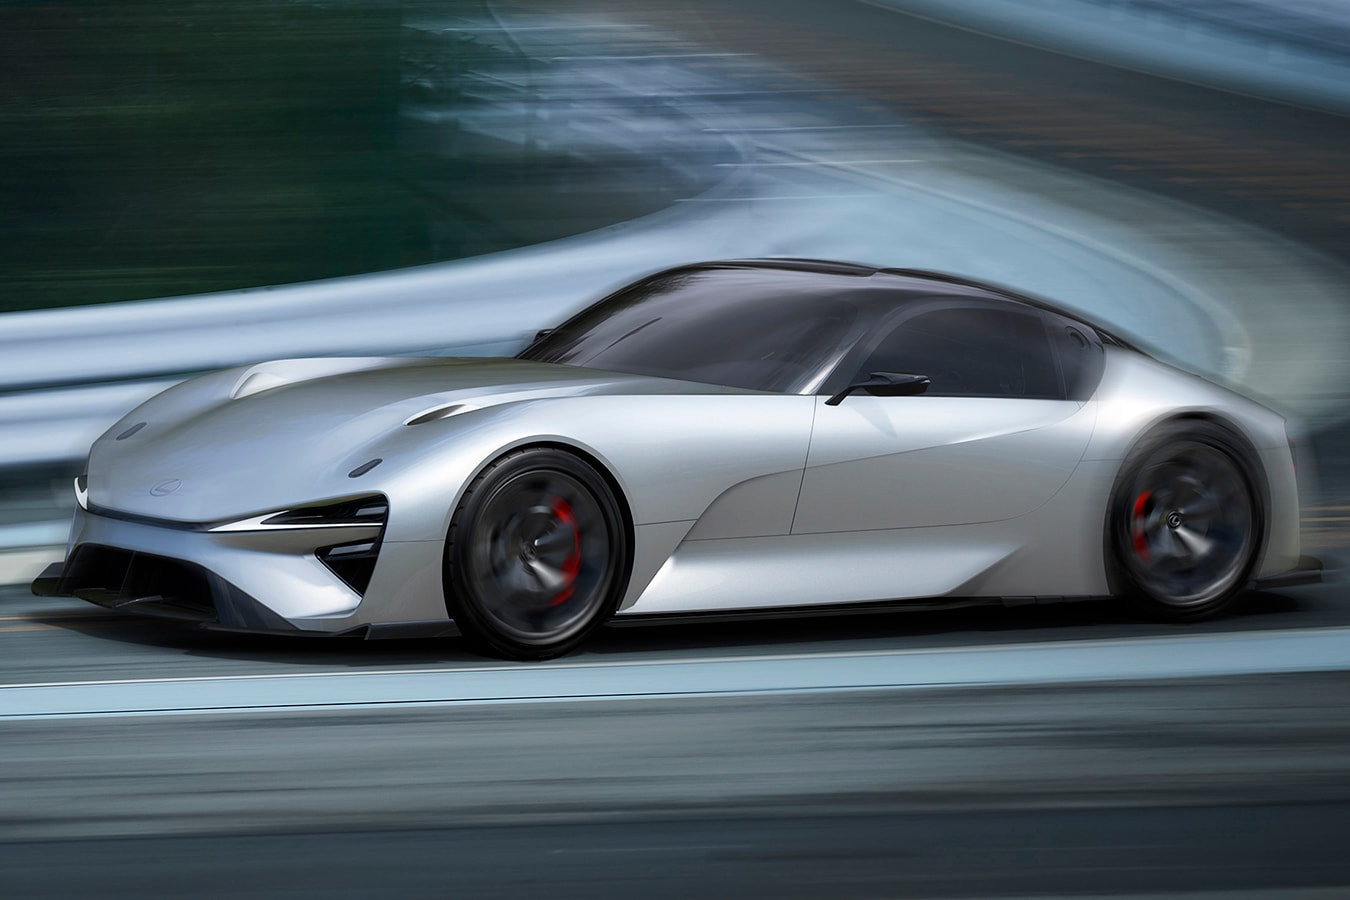 Lexus Electrified EV Supercar Electric LFA Replacement Japanese Toyota Motor Company Concept First Look 